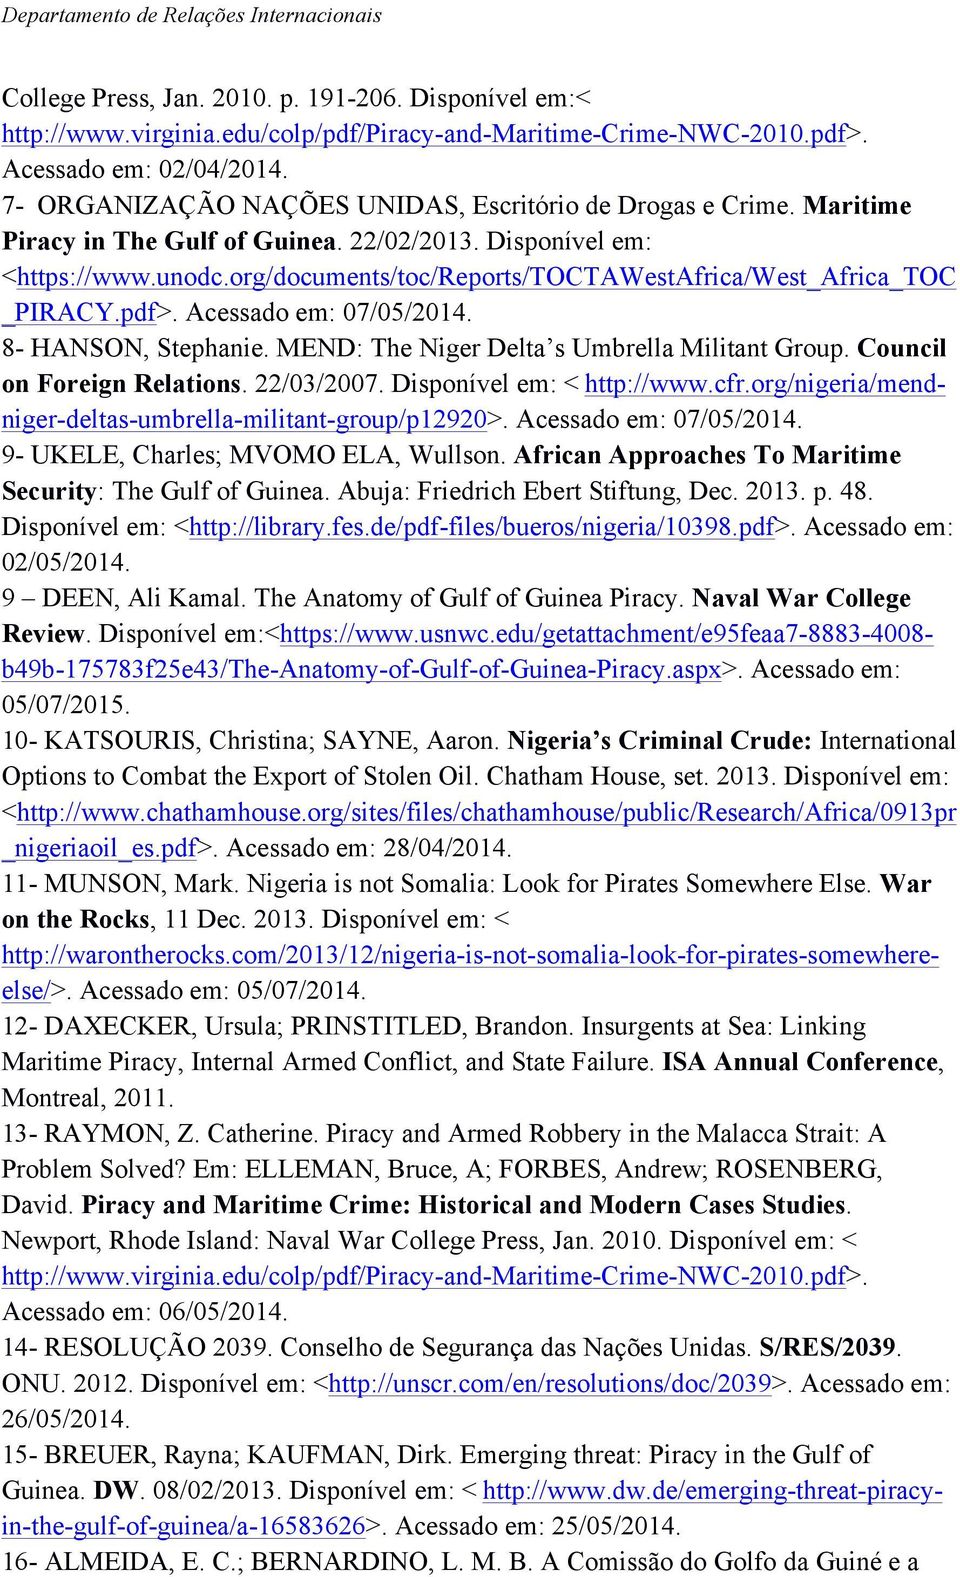 org/documents/toc/reports/toctawestafrica/west_africa_toc _PIRACY.pdf>. Acessado em: 07/05/2014. 8- HANSON, Stephanie. MEND: The Niger Delta s Umbrella Militant Group. Council on Foreign Relations.